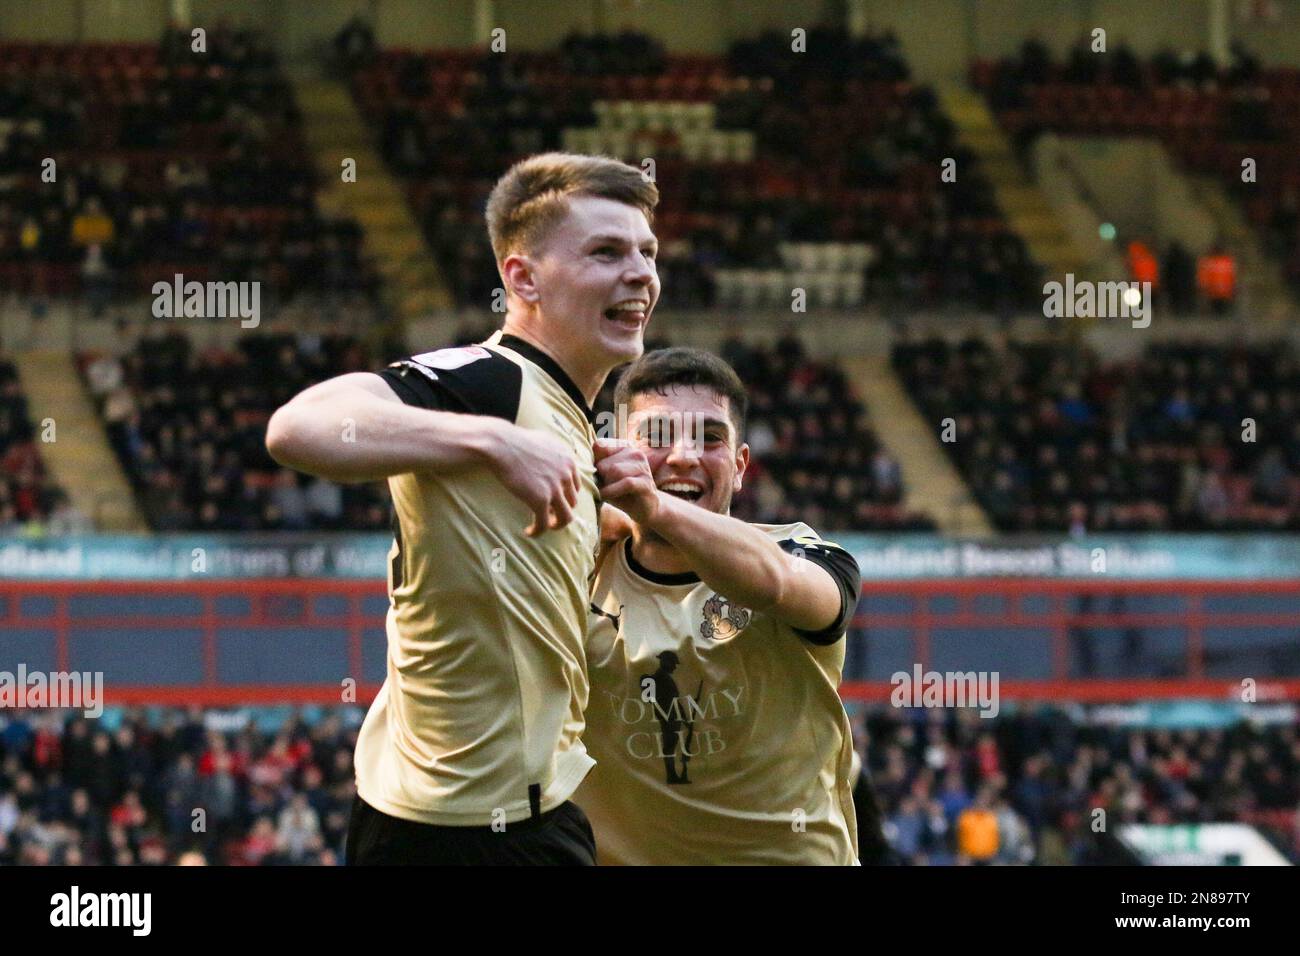 Ed Turns of Leyton (L) celebrates scoring their side's first goal of the game during the Sky Bet League 2 match between Walsall and Leyton Orient at the Banks's Stadium, Walsall on Saturday 11th February 2023. (Photo: Gustavo Pantano | MI News) Credit: MI News & Sport /Alamy Live News Stock Photo